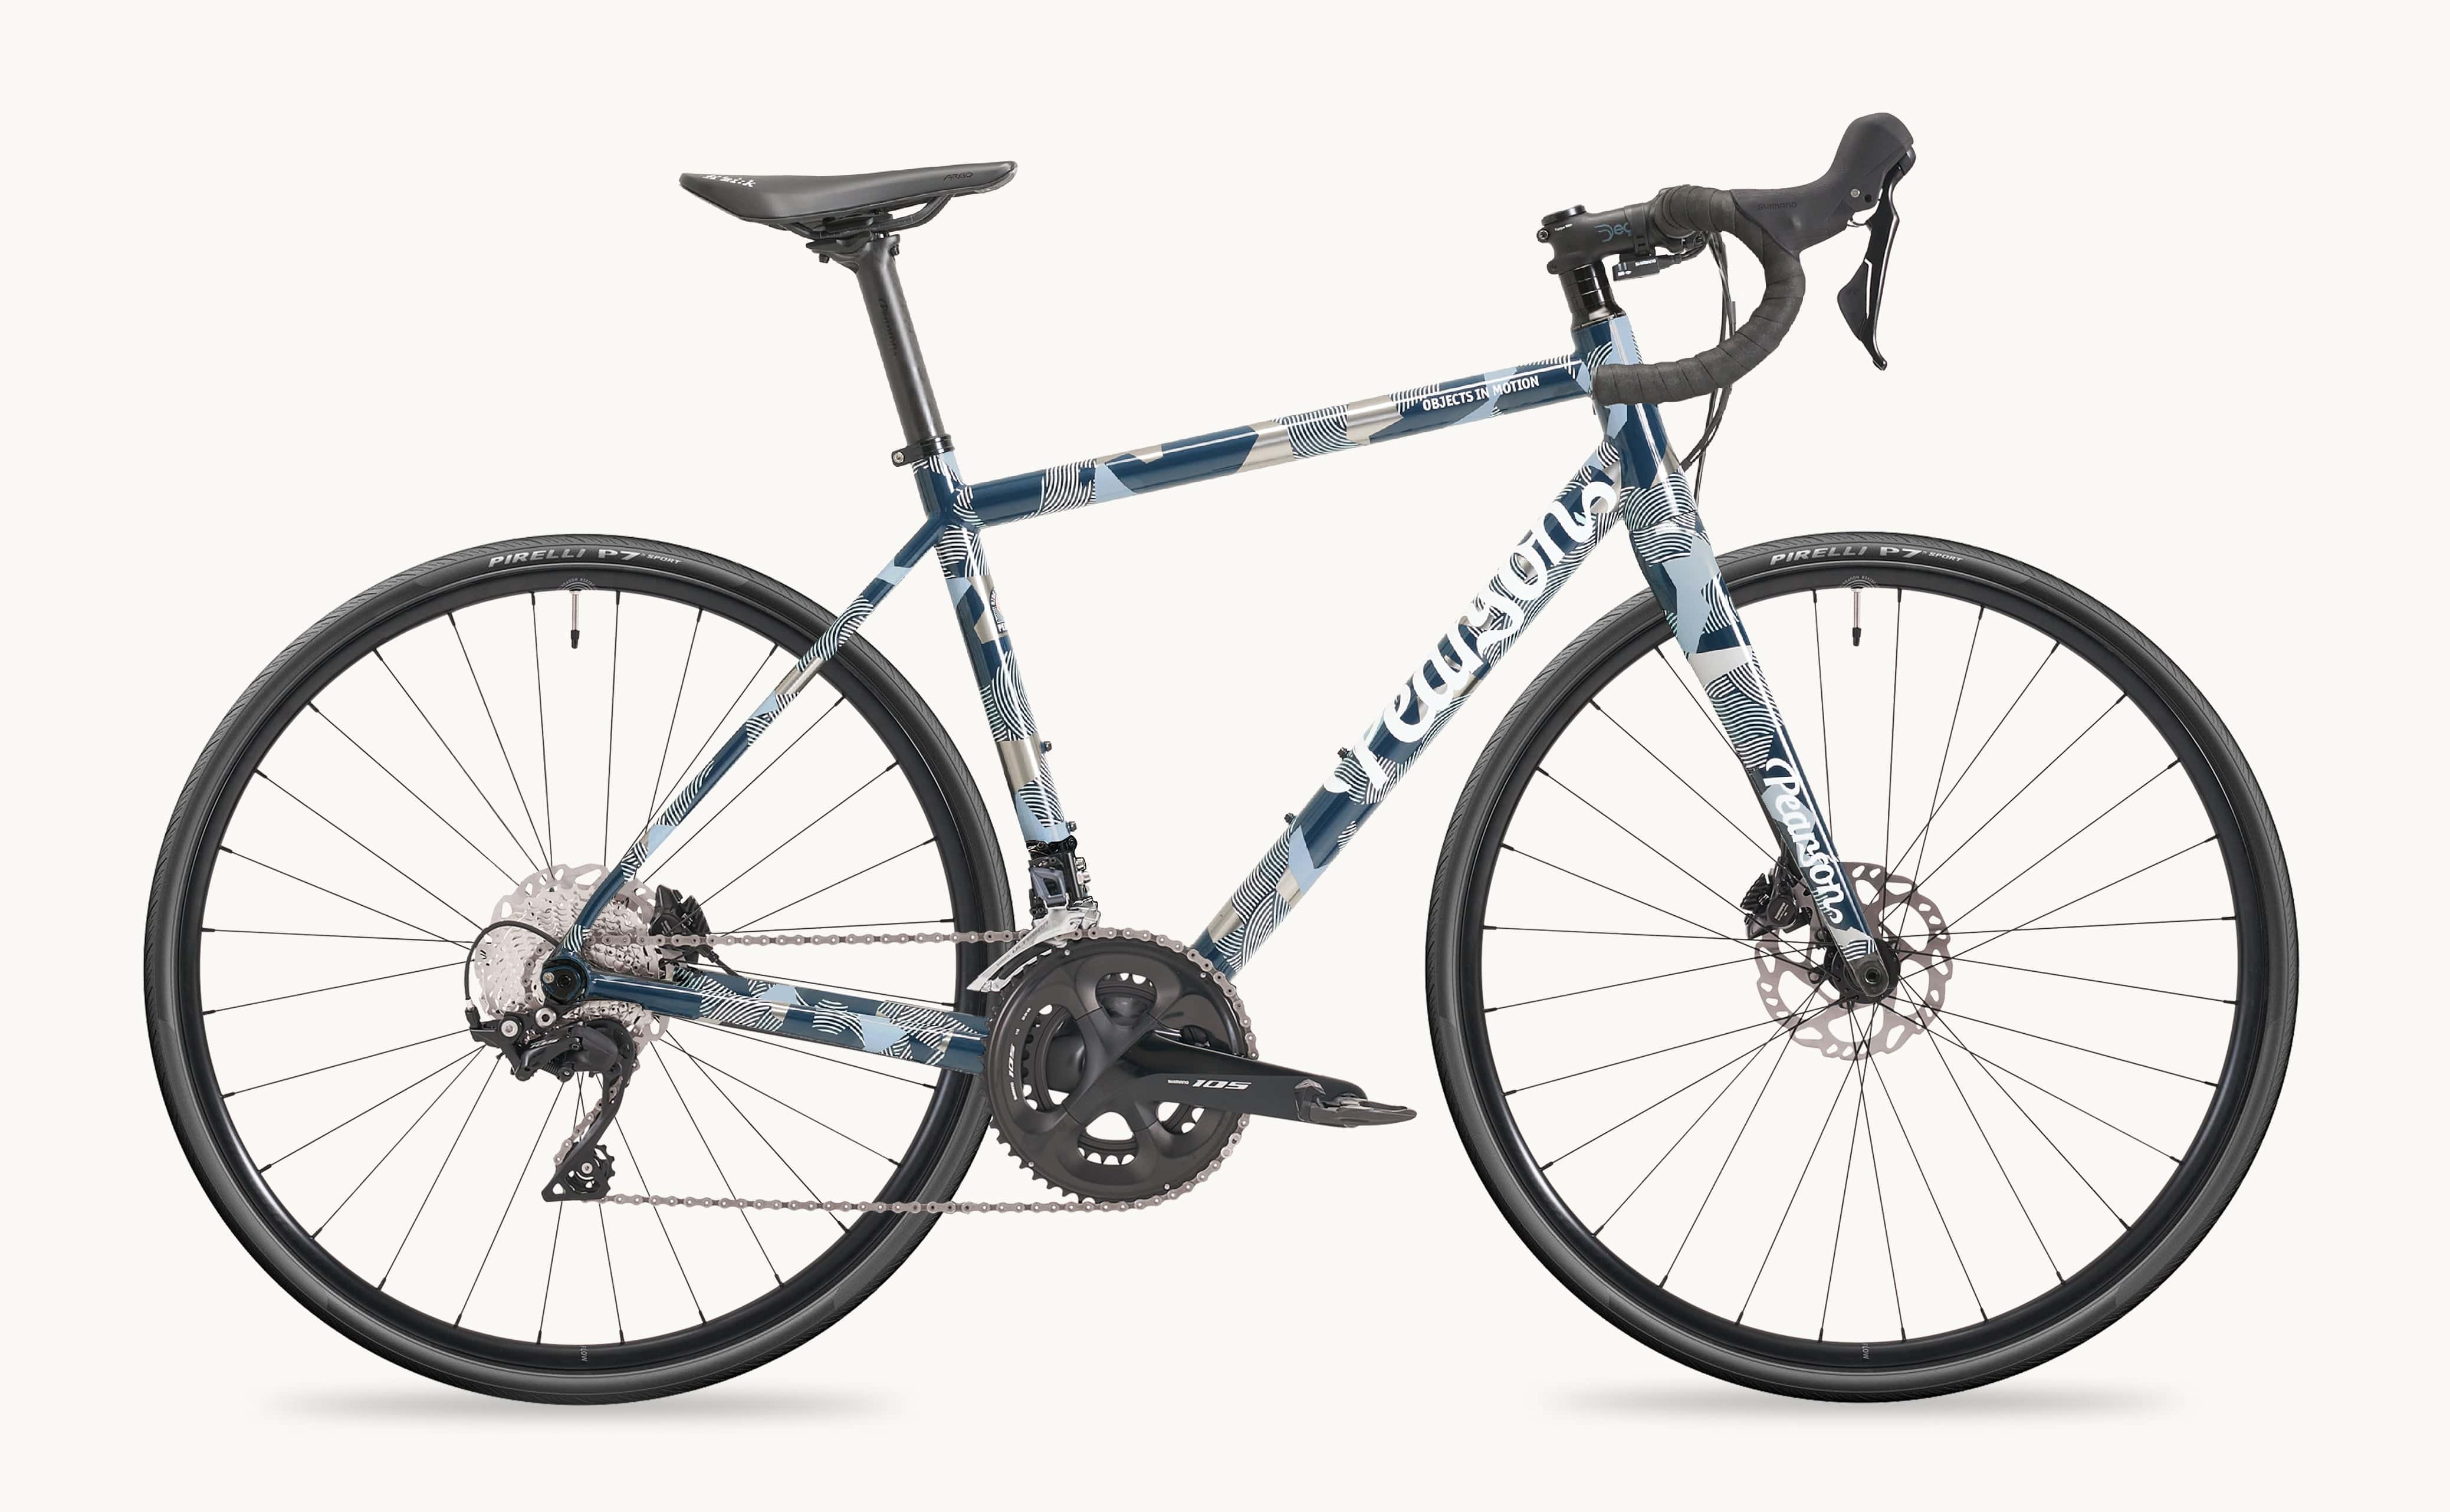 Pcs  Special Offer: Objects In Motion Shimano 105 - Titanium Road Bike  Medium / Blue Camo / Shimano 105 Mechanical - Pearson Ebb And Flow Alloy Wheels